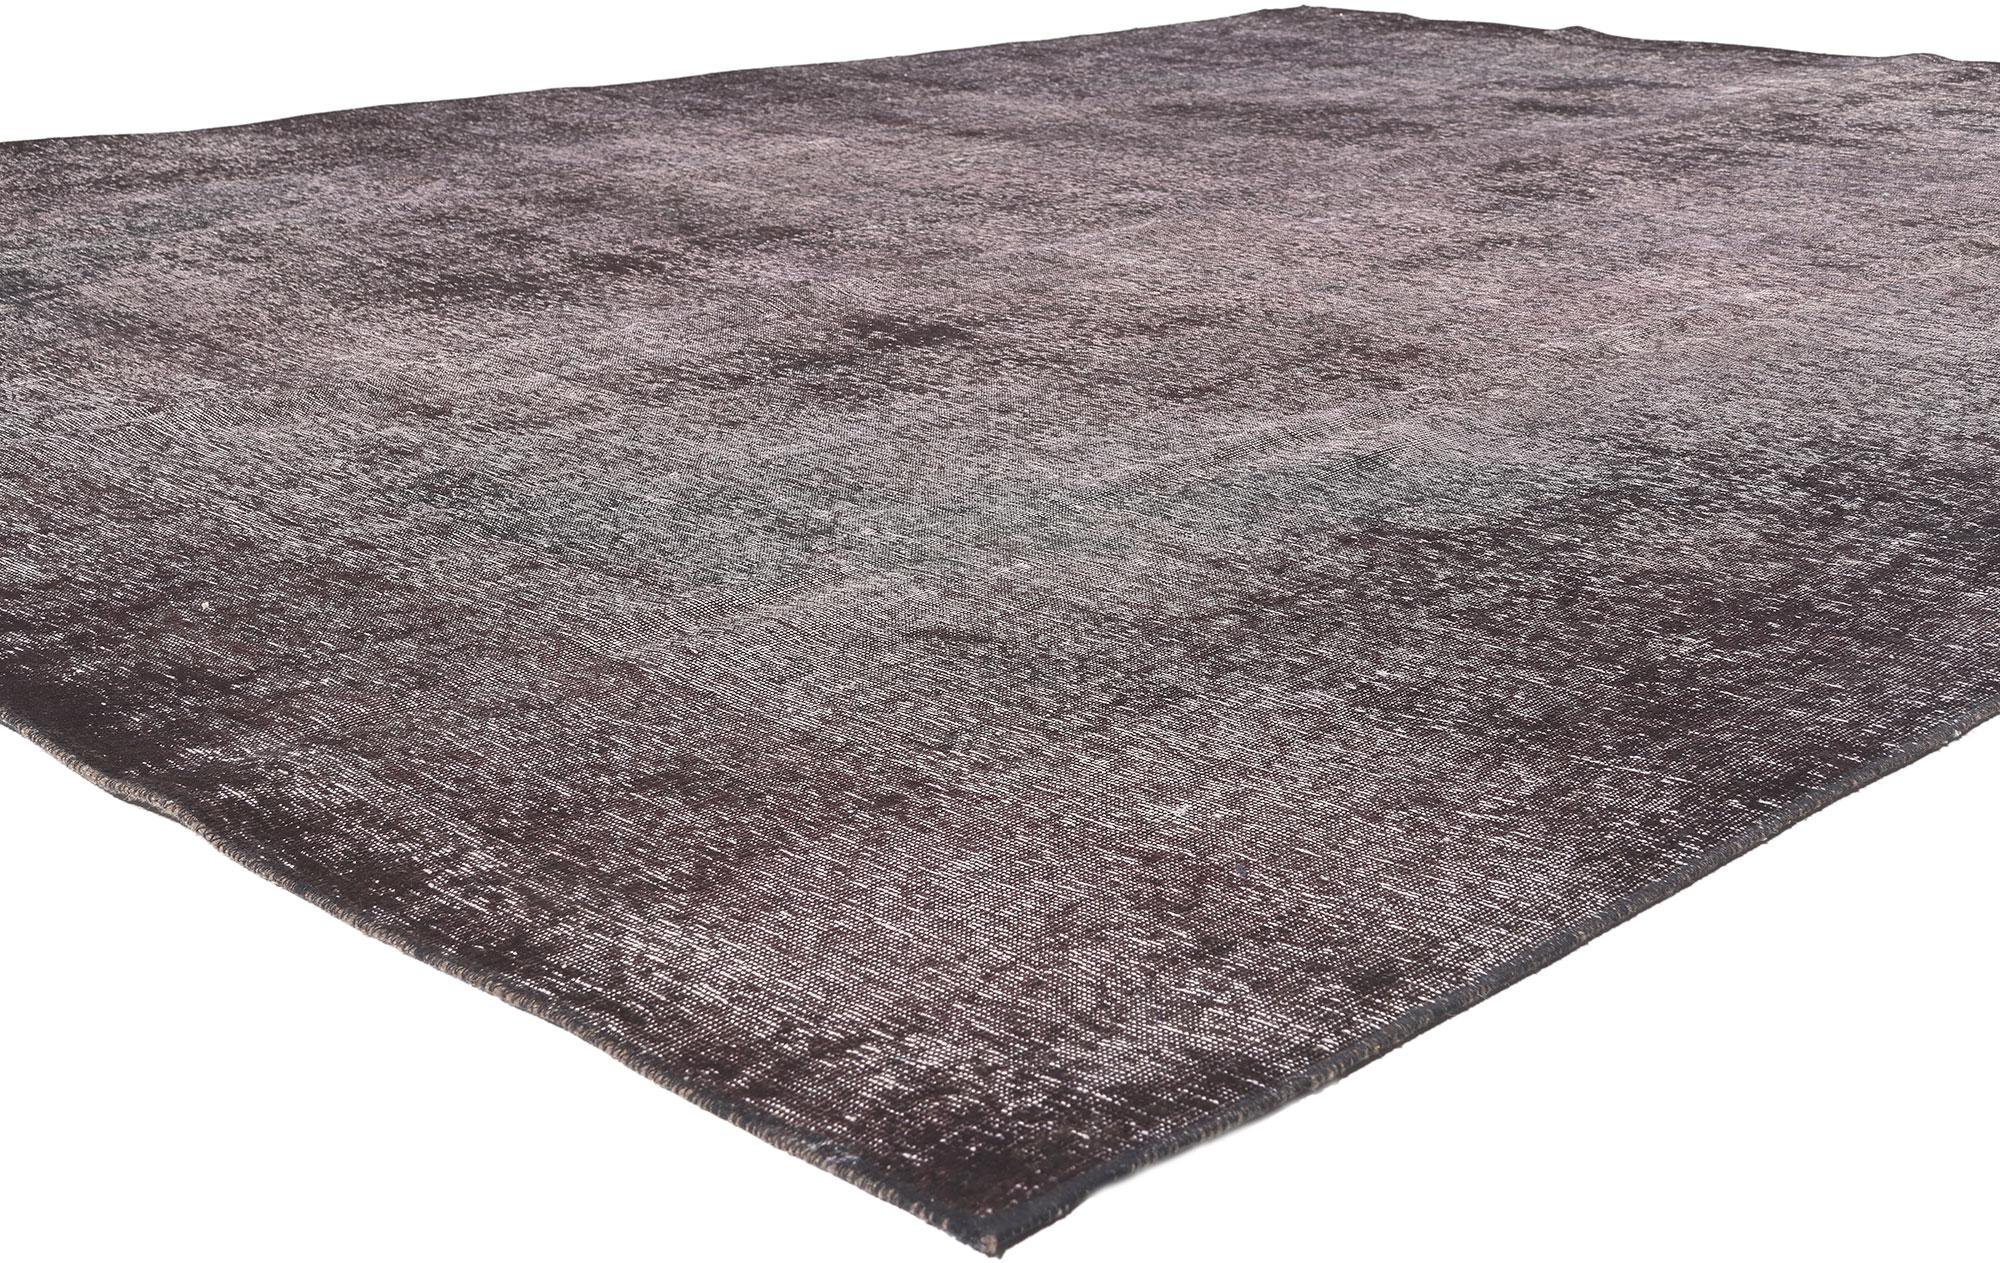 60675 Vintage Turkish Overdyed Rug, 09'06 x 12'06. 
​In a captivating fusion of Industrial Chic and luxe utilitarian appeal, this hand-knotted wool vintage Turkish overdyed rug becomes a masterpiece that transcends design conventions. The erased